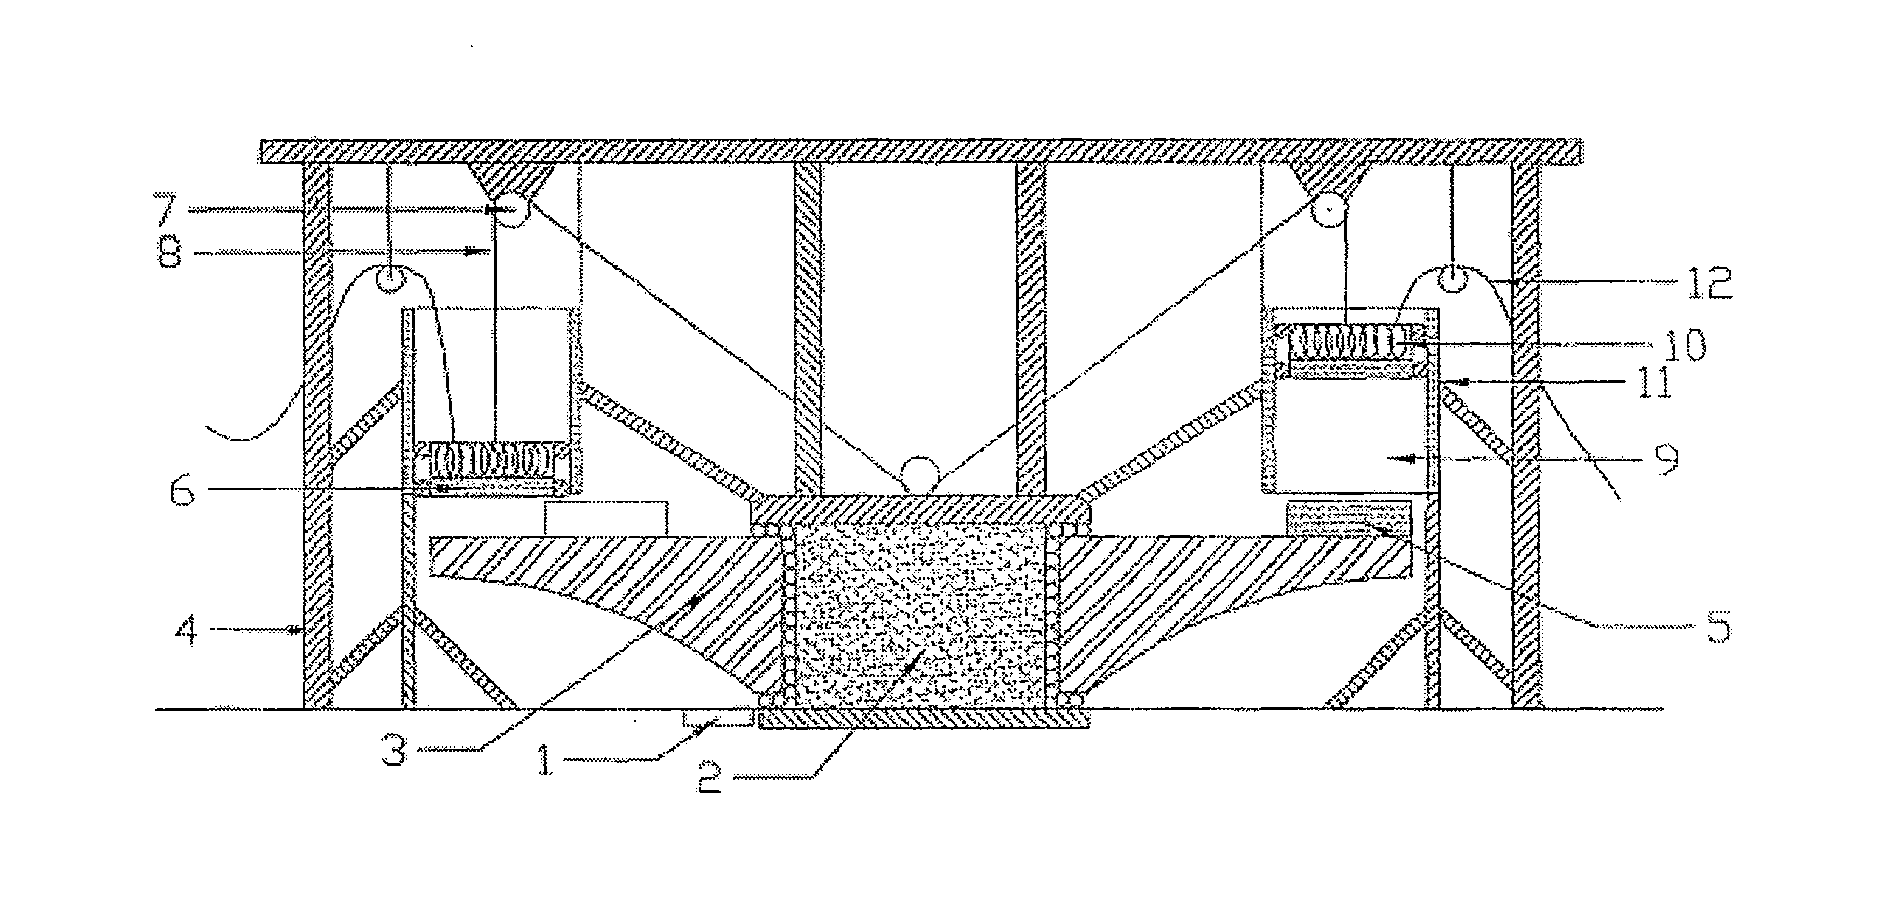 Lifting device, power generation device and sea reverse osmosis device